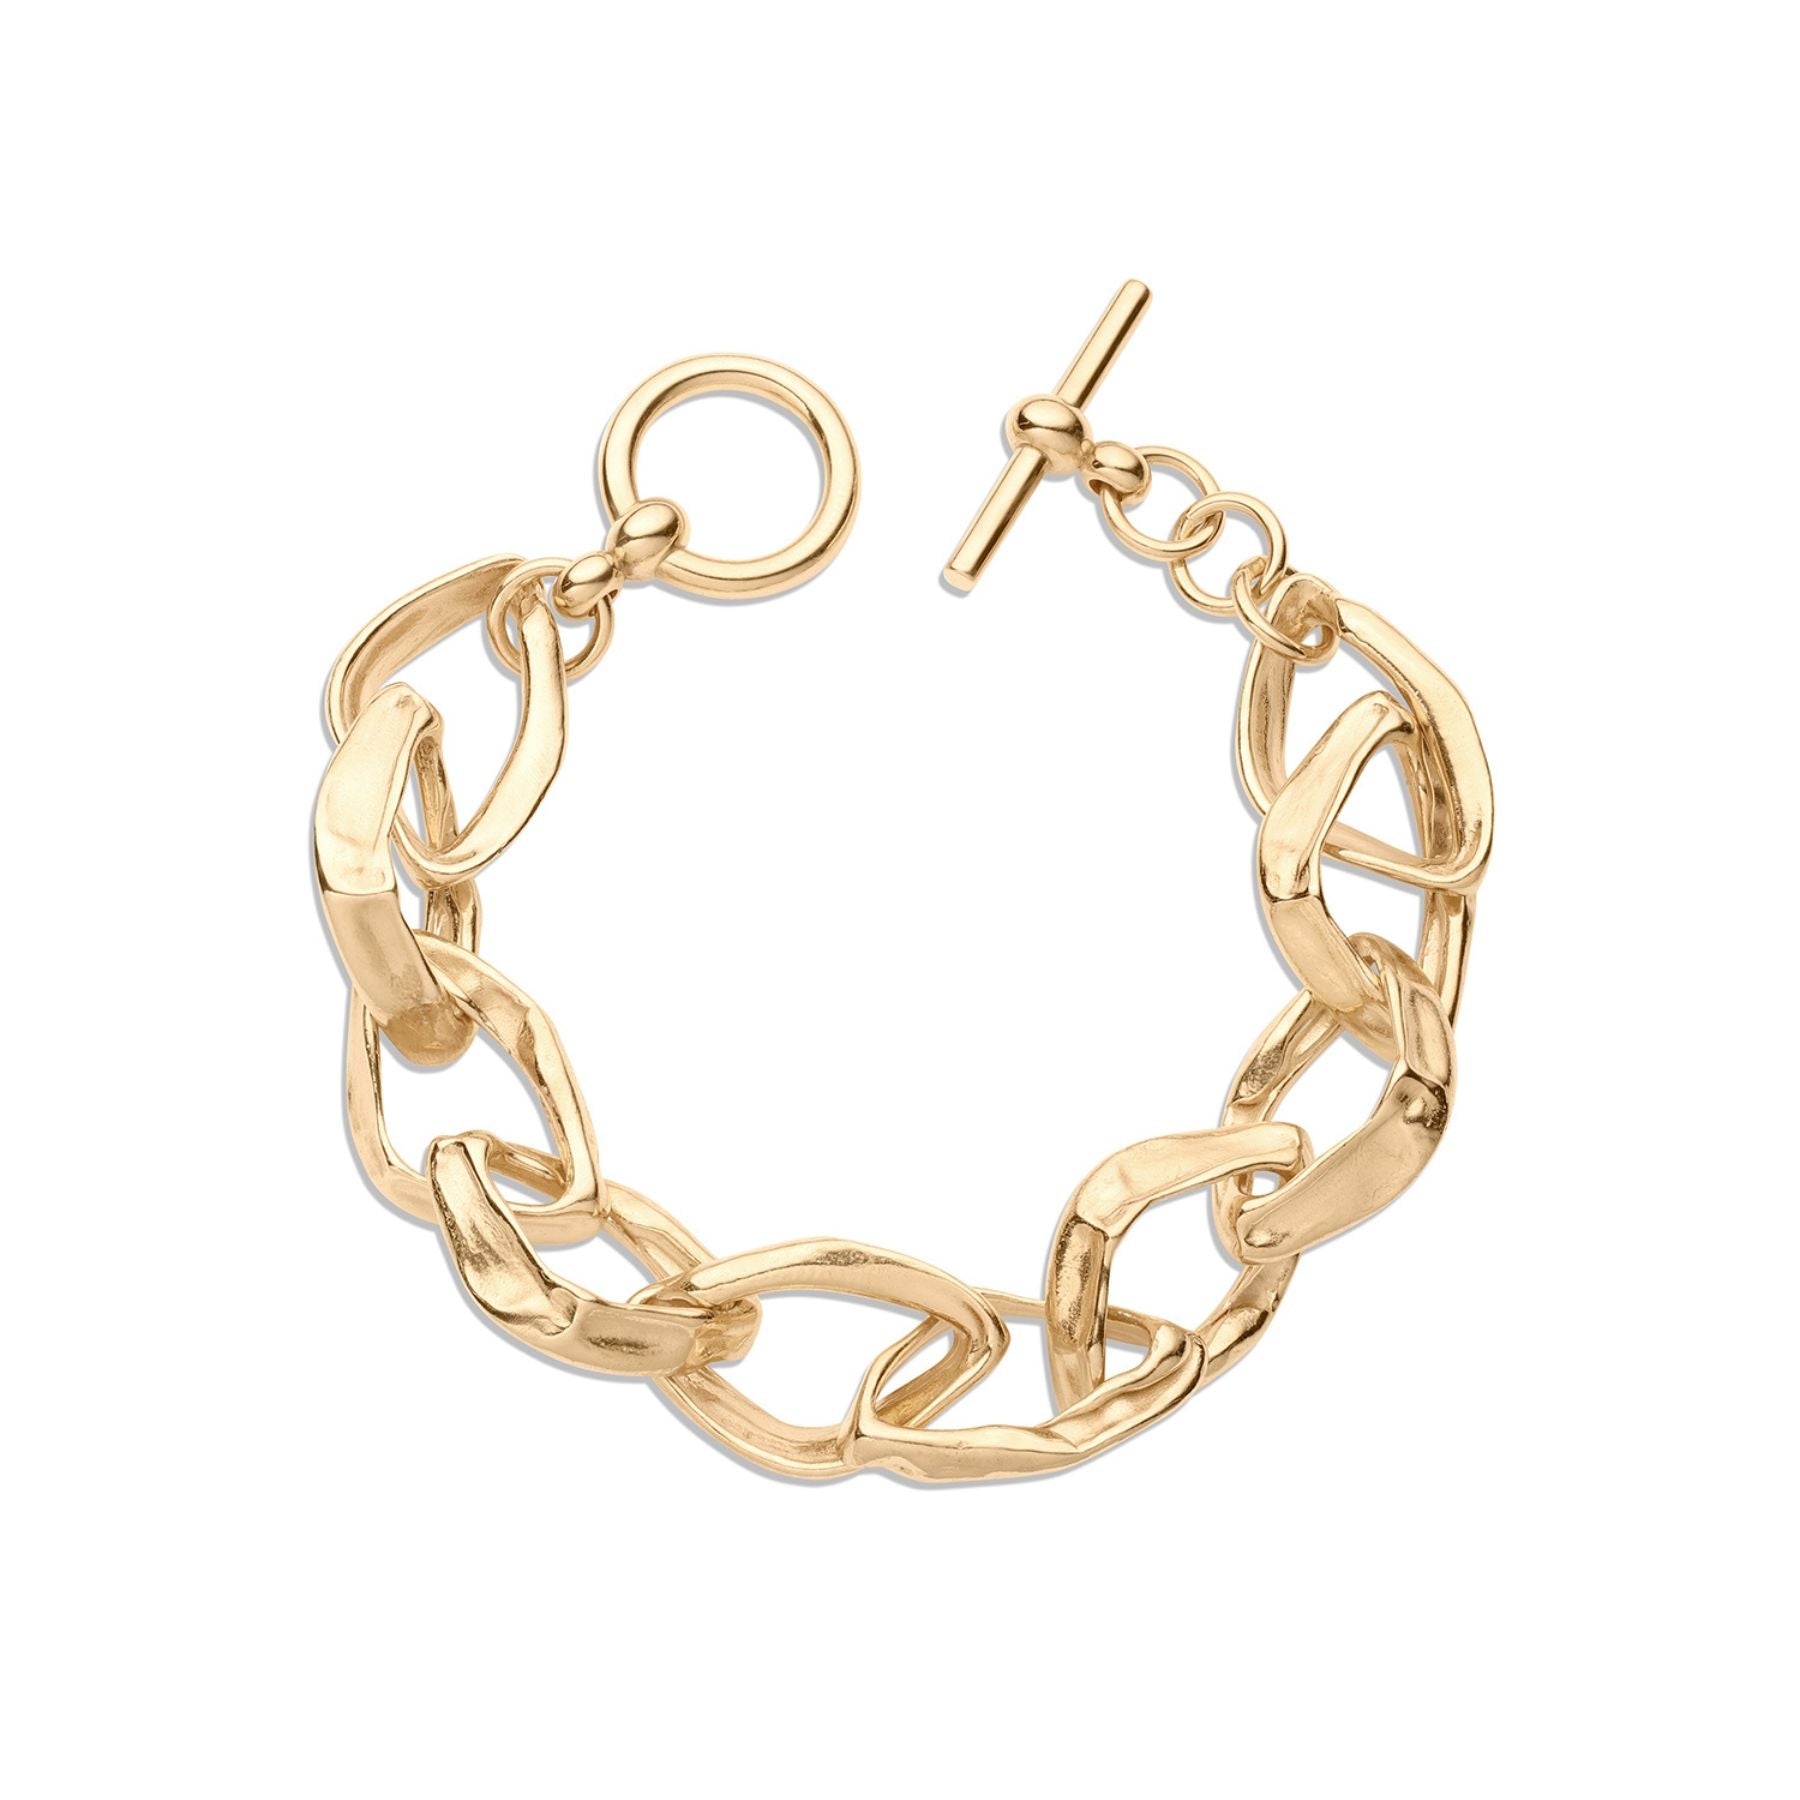 Abstract chunky chain bracelet with a toggle clasp in 18k gold vermeil.